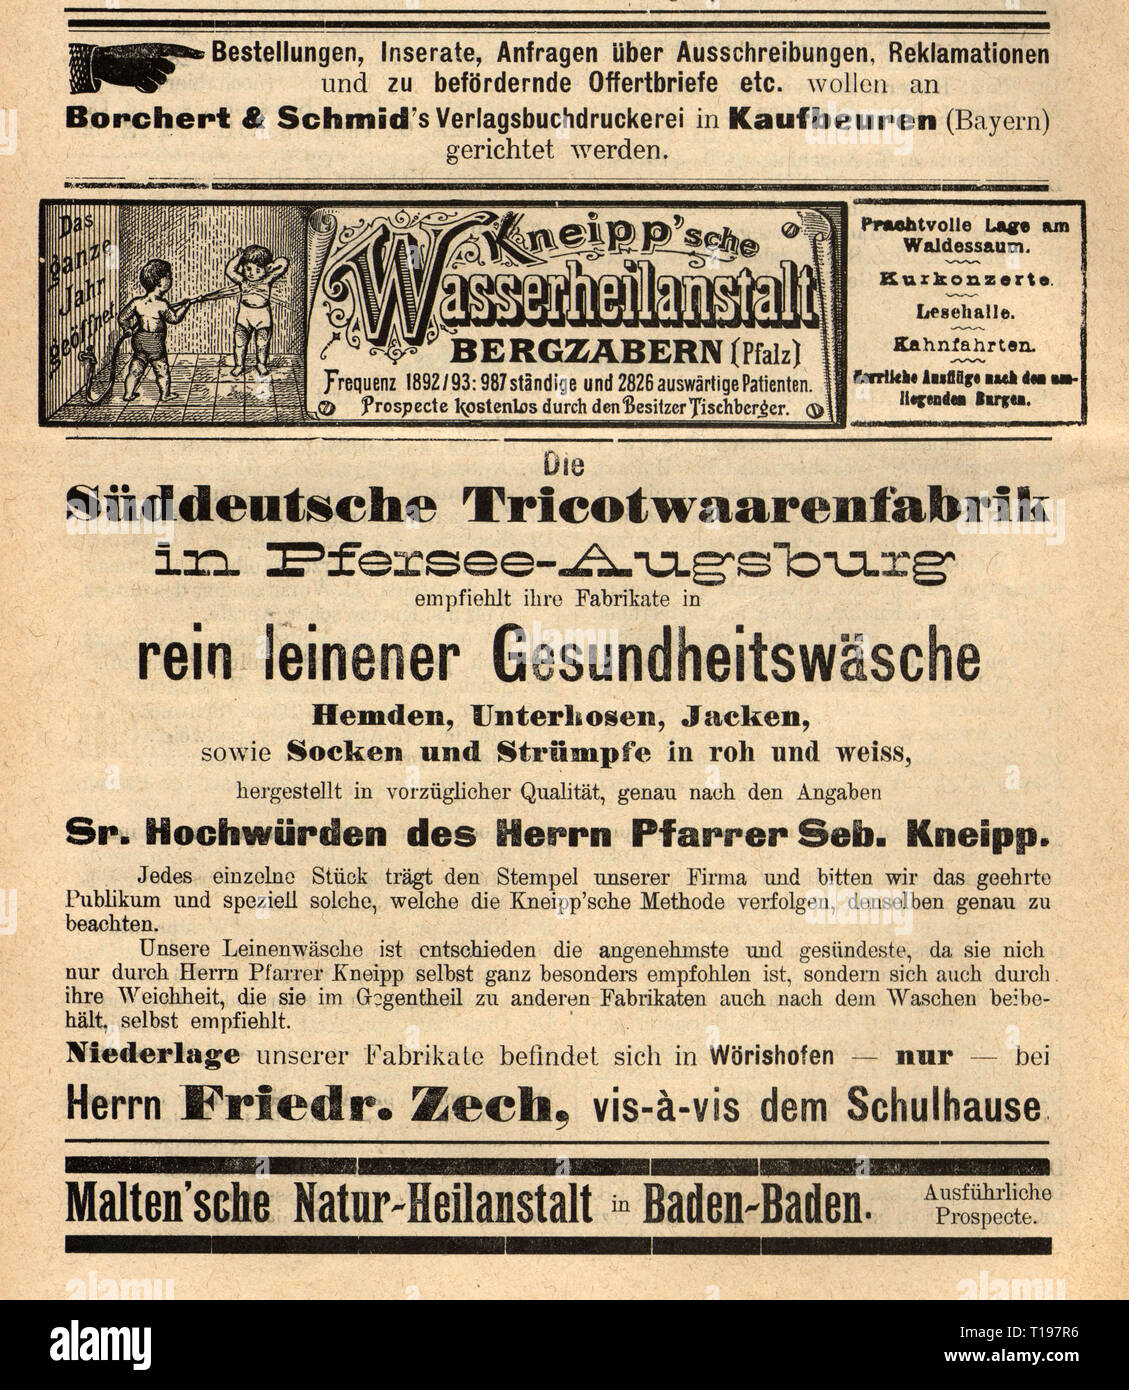 advertising, medicine, naturopathy, advertisements in the 'Central-Blatt fuer das Kneippsche Heilverfahren' (Central Organ for the Therapy according to Kneipp), editor: Alfred Baumgarten (1862 - 1924), IIIrd volume, front page, Kaufbeuren, 1896 / 1897, Additional-Rights-Clearance-Info-Not-Available Stock Photo